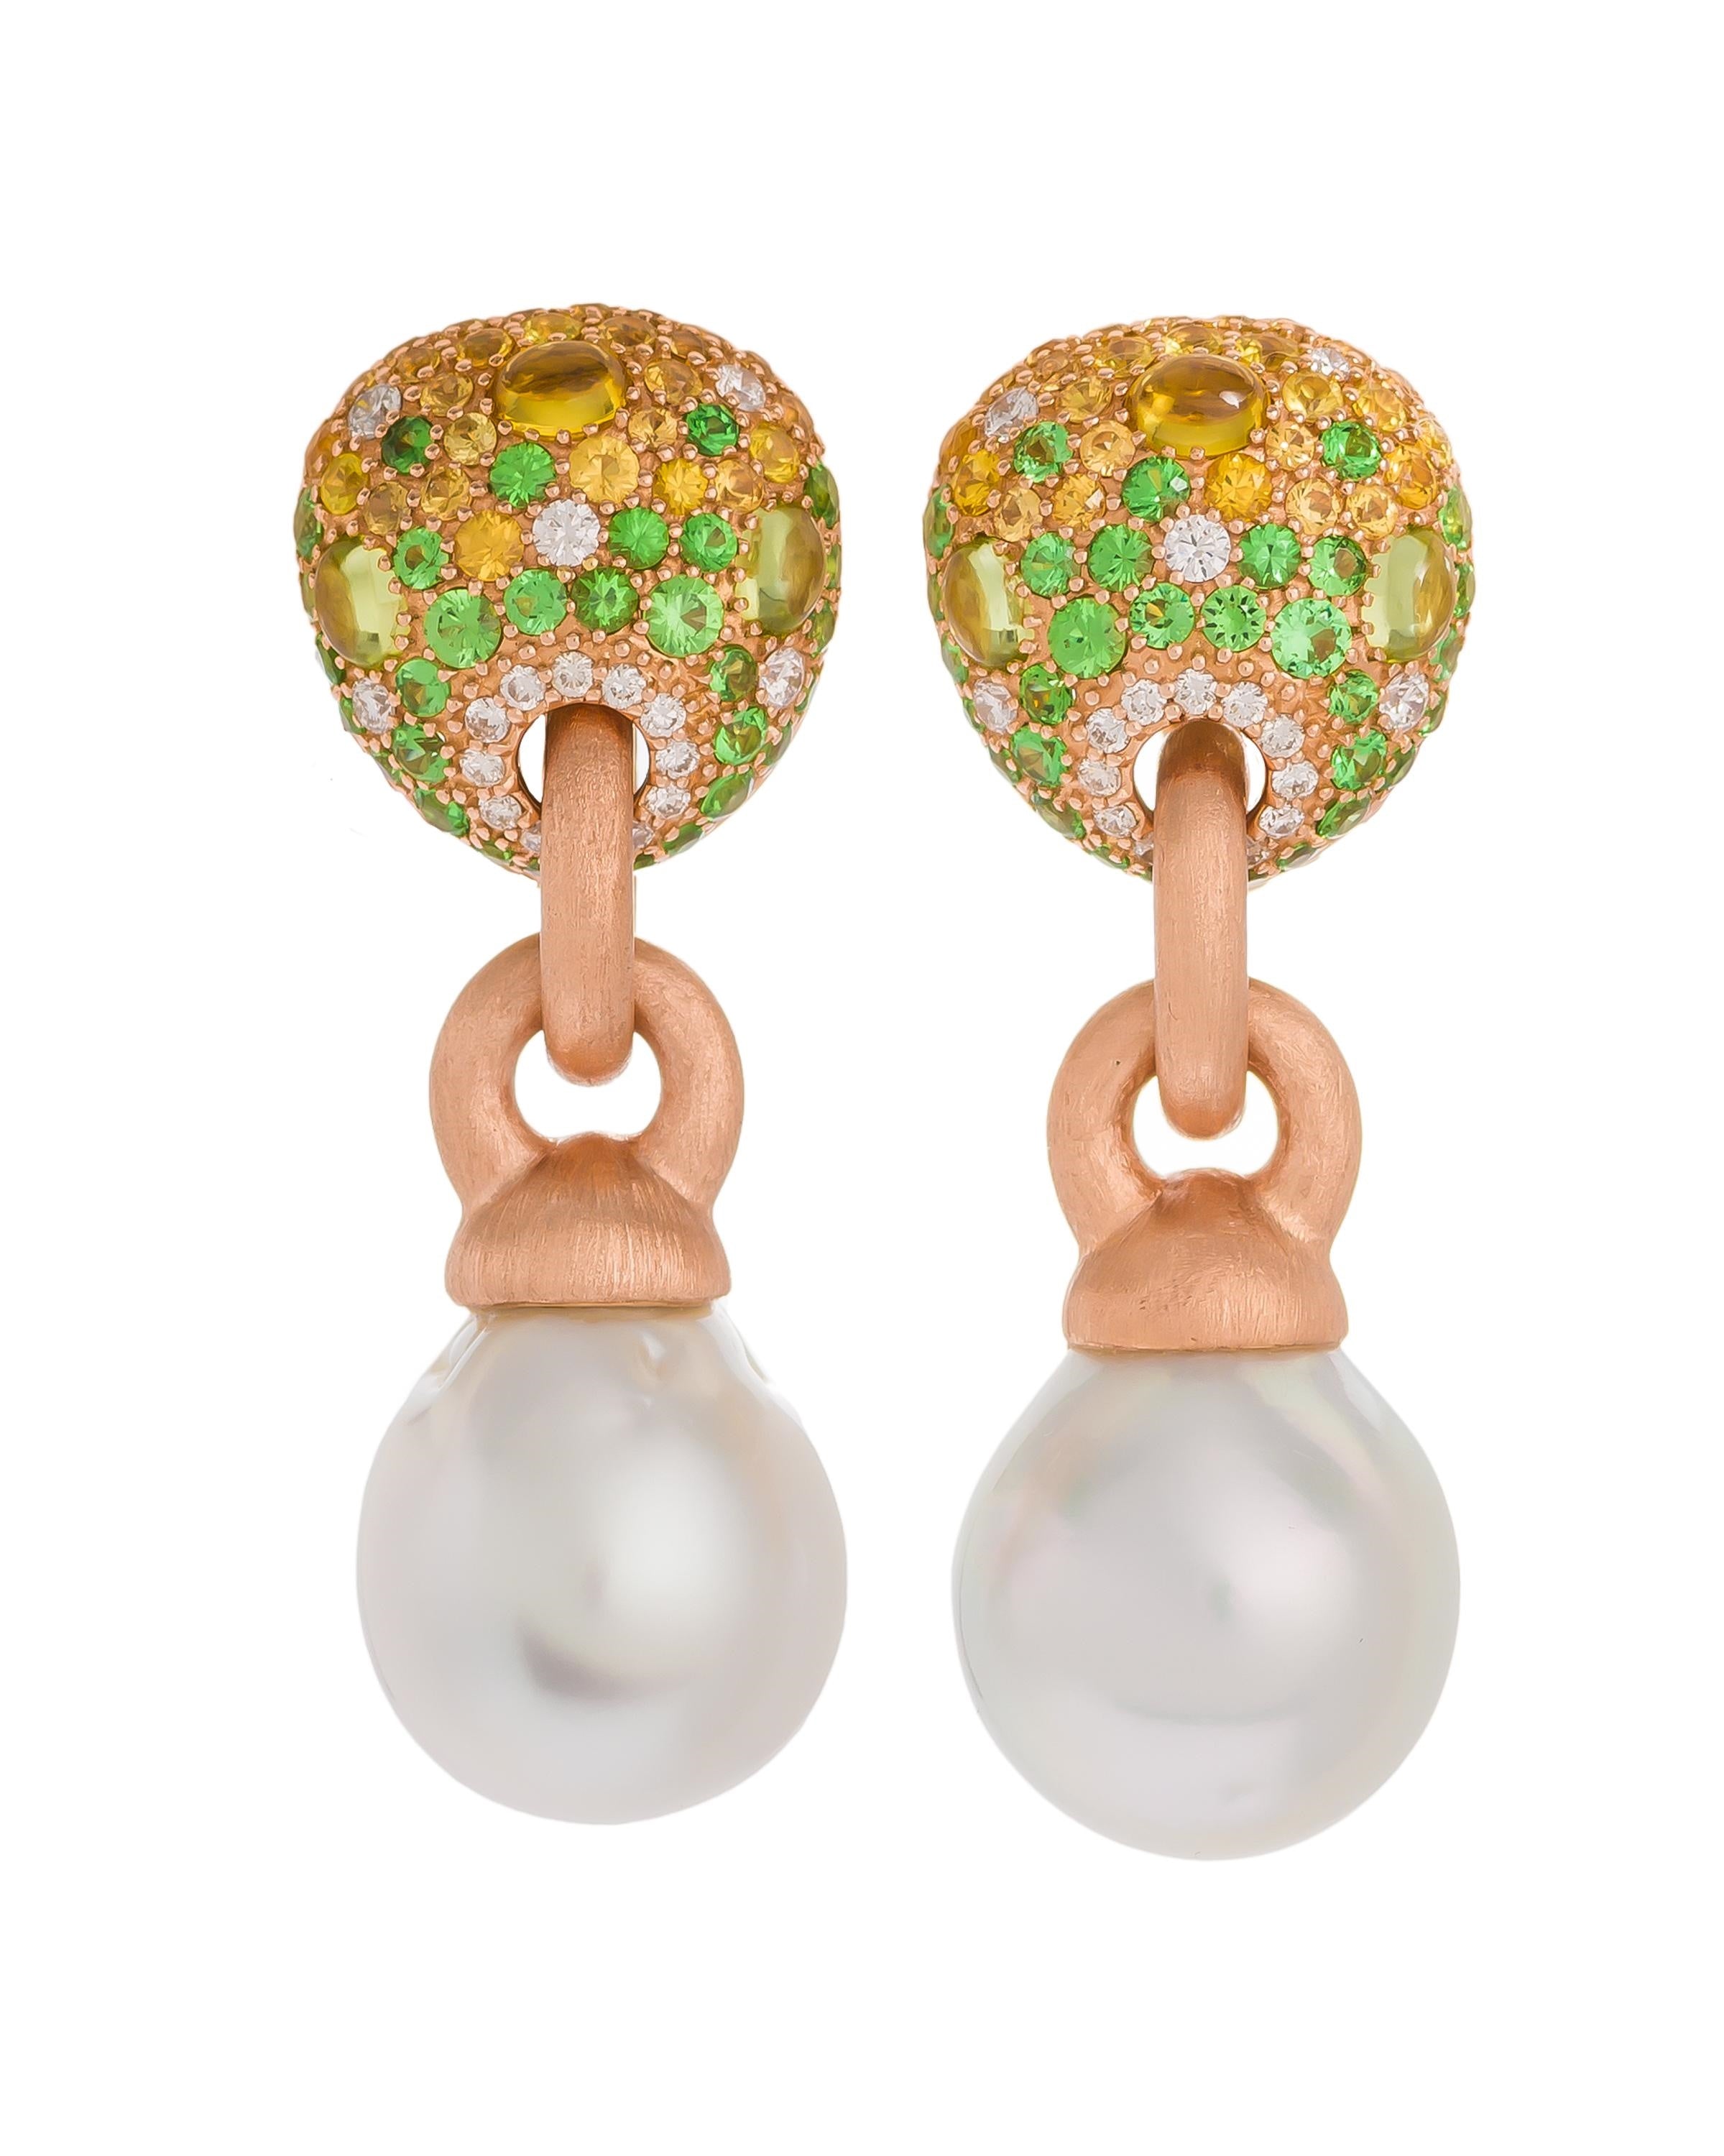 South Sea pearl mini cookie drop earrings enhanced with a myriad of gemstones and diamonds, crafted in 18 karat rose gold